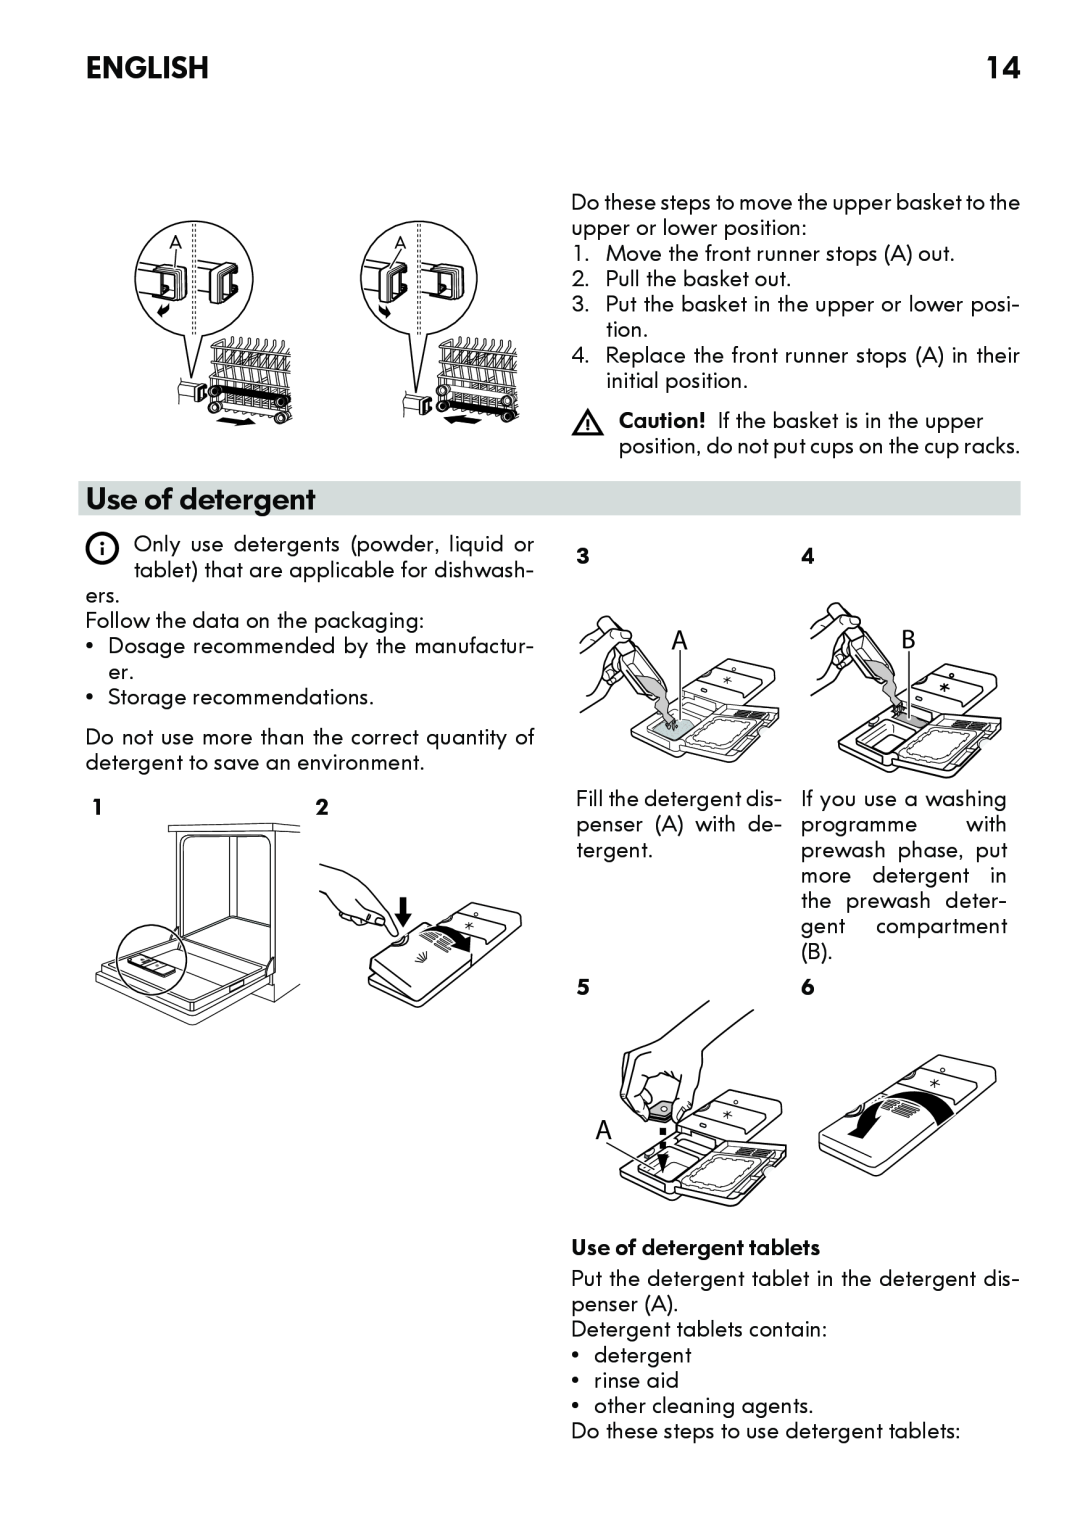 IKEA DW60 manual Use of detergent, English 